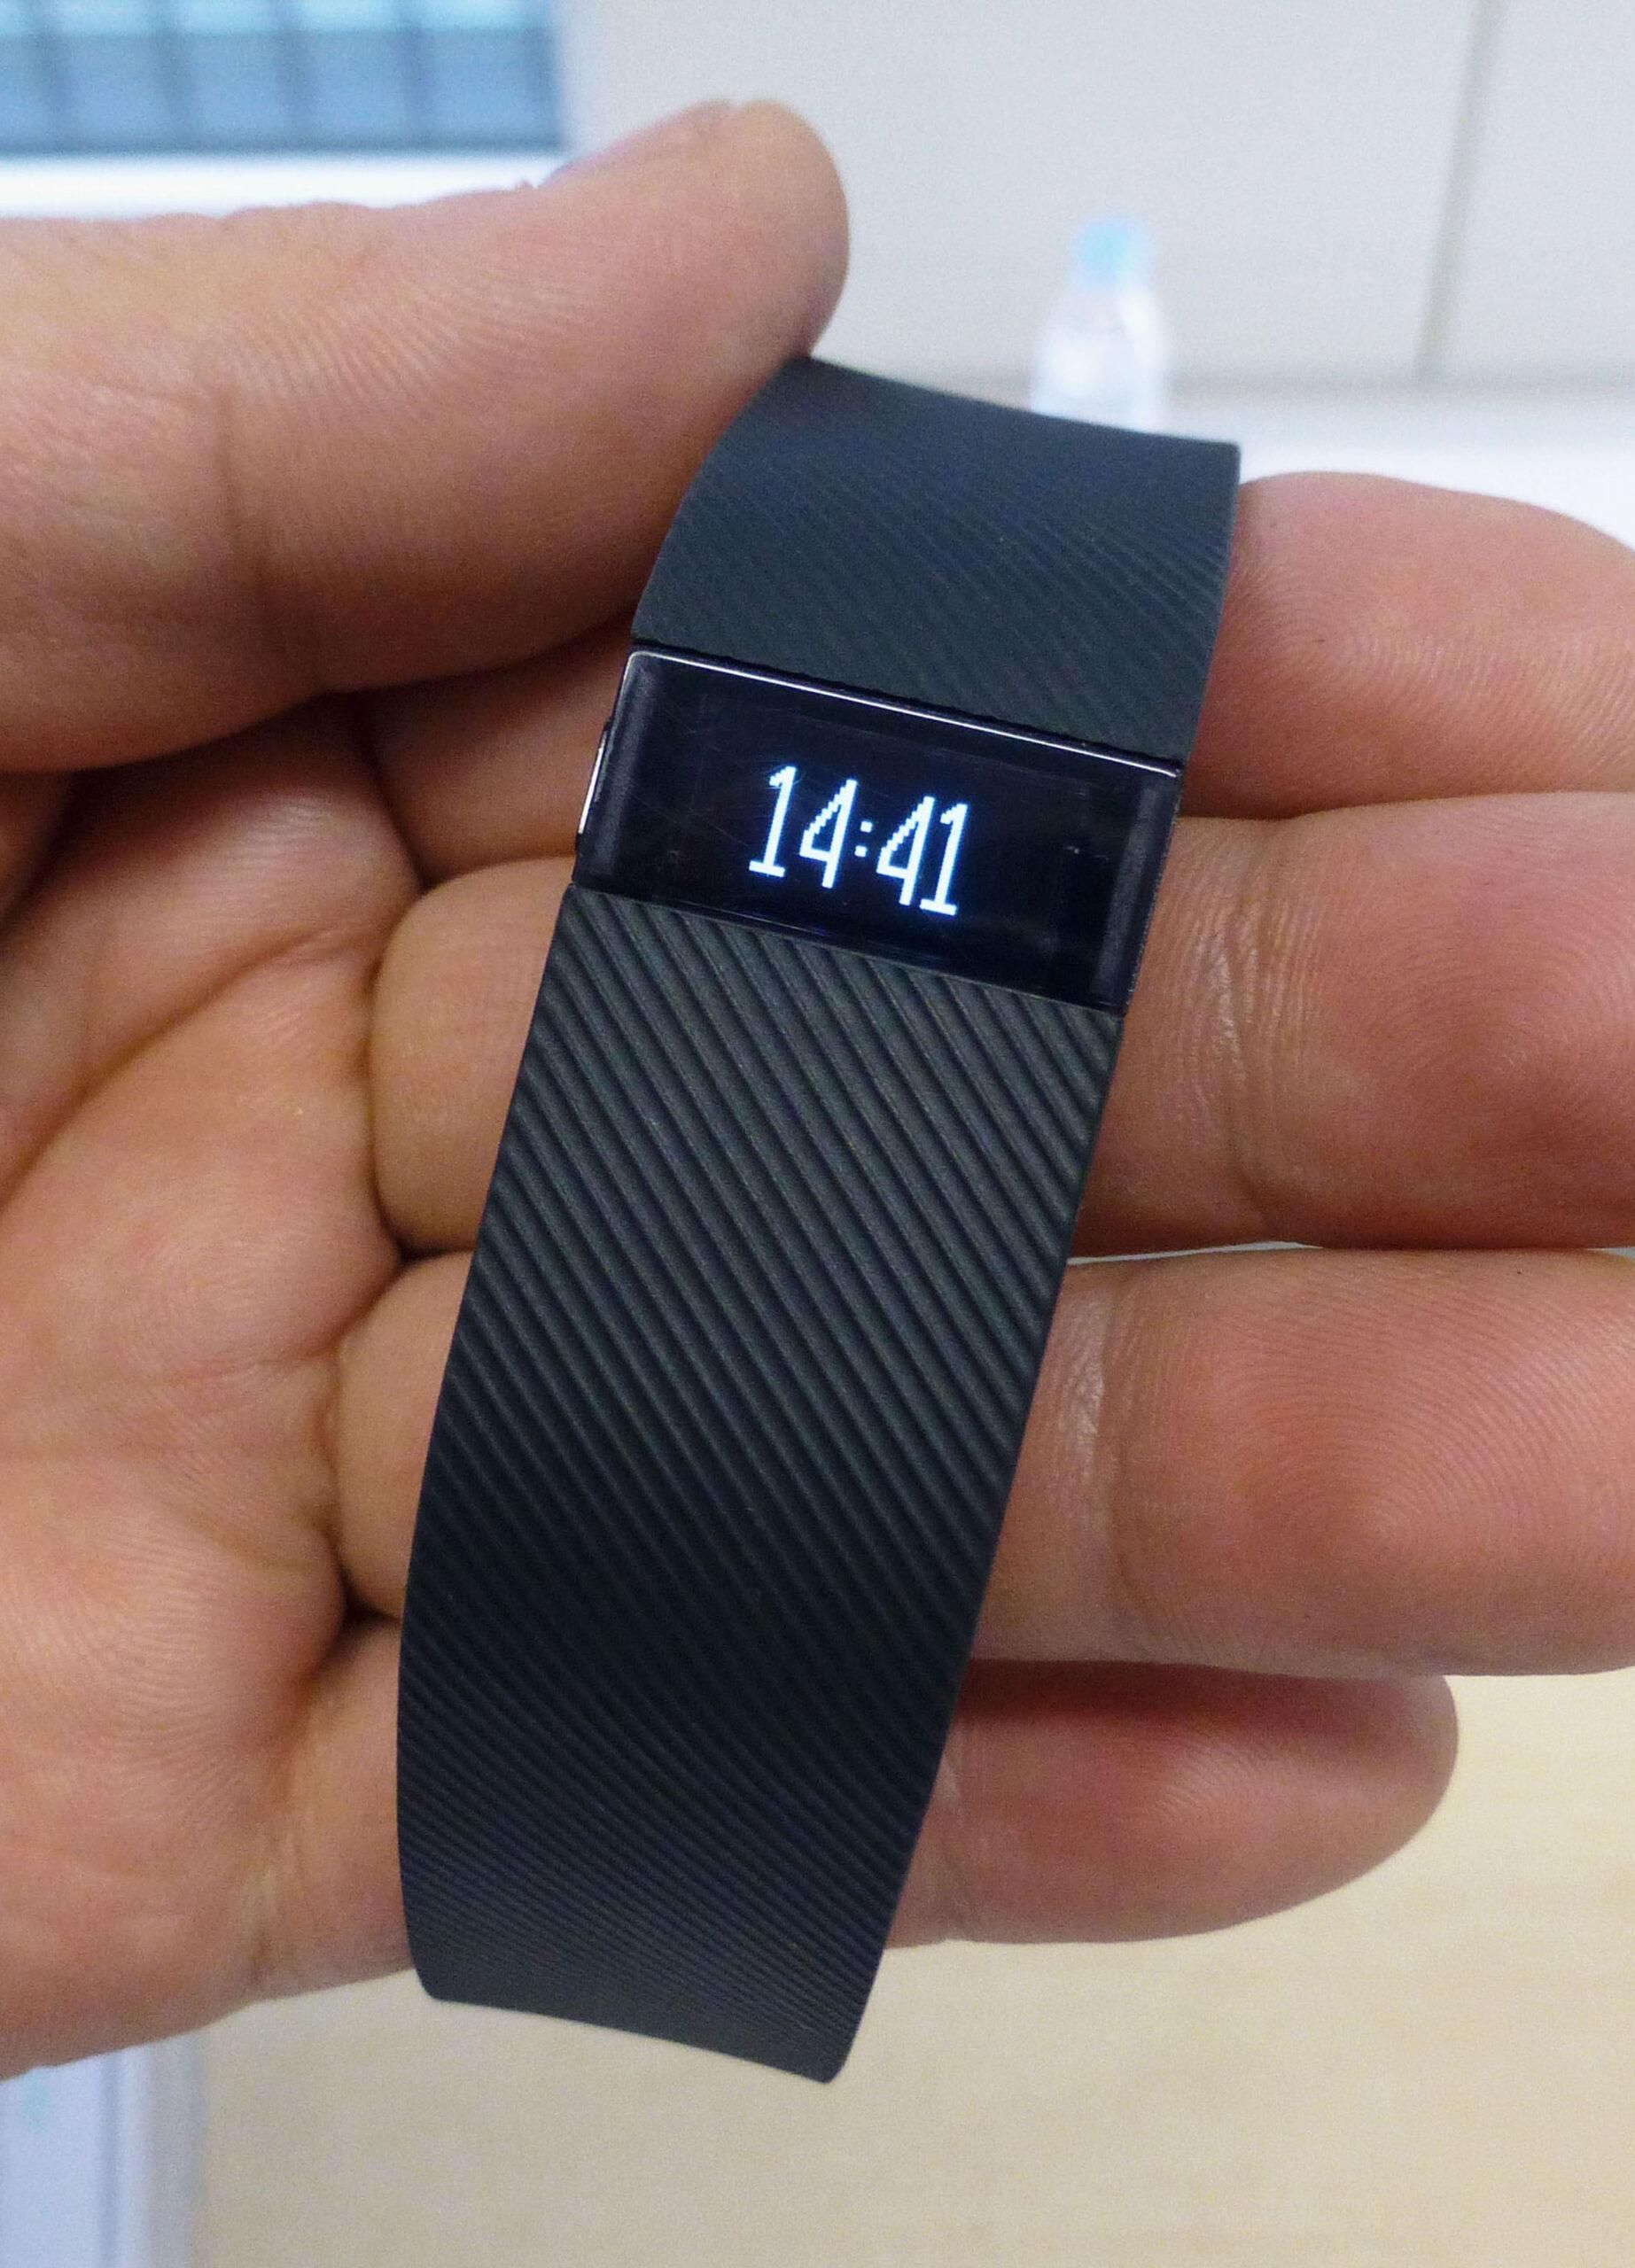 Wearable activity-tracker market bracing for keen competition